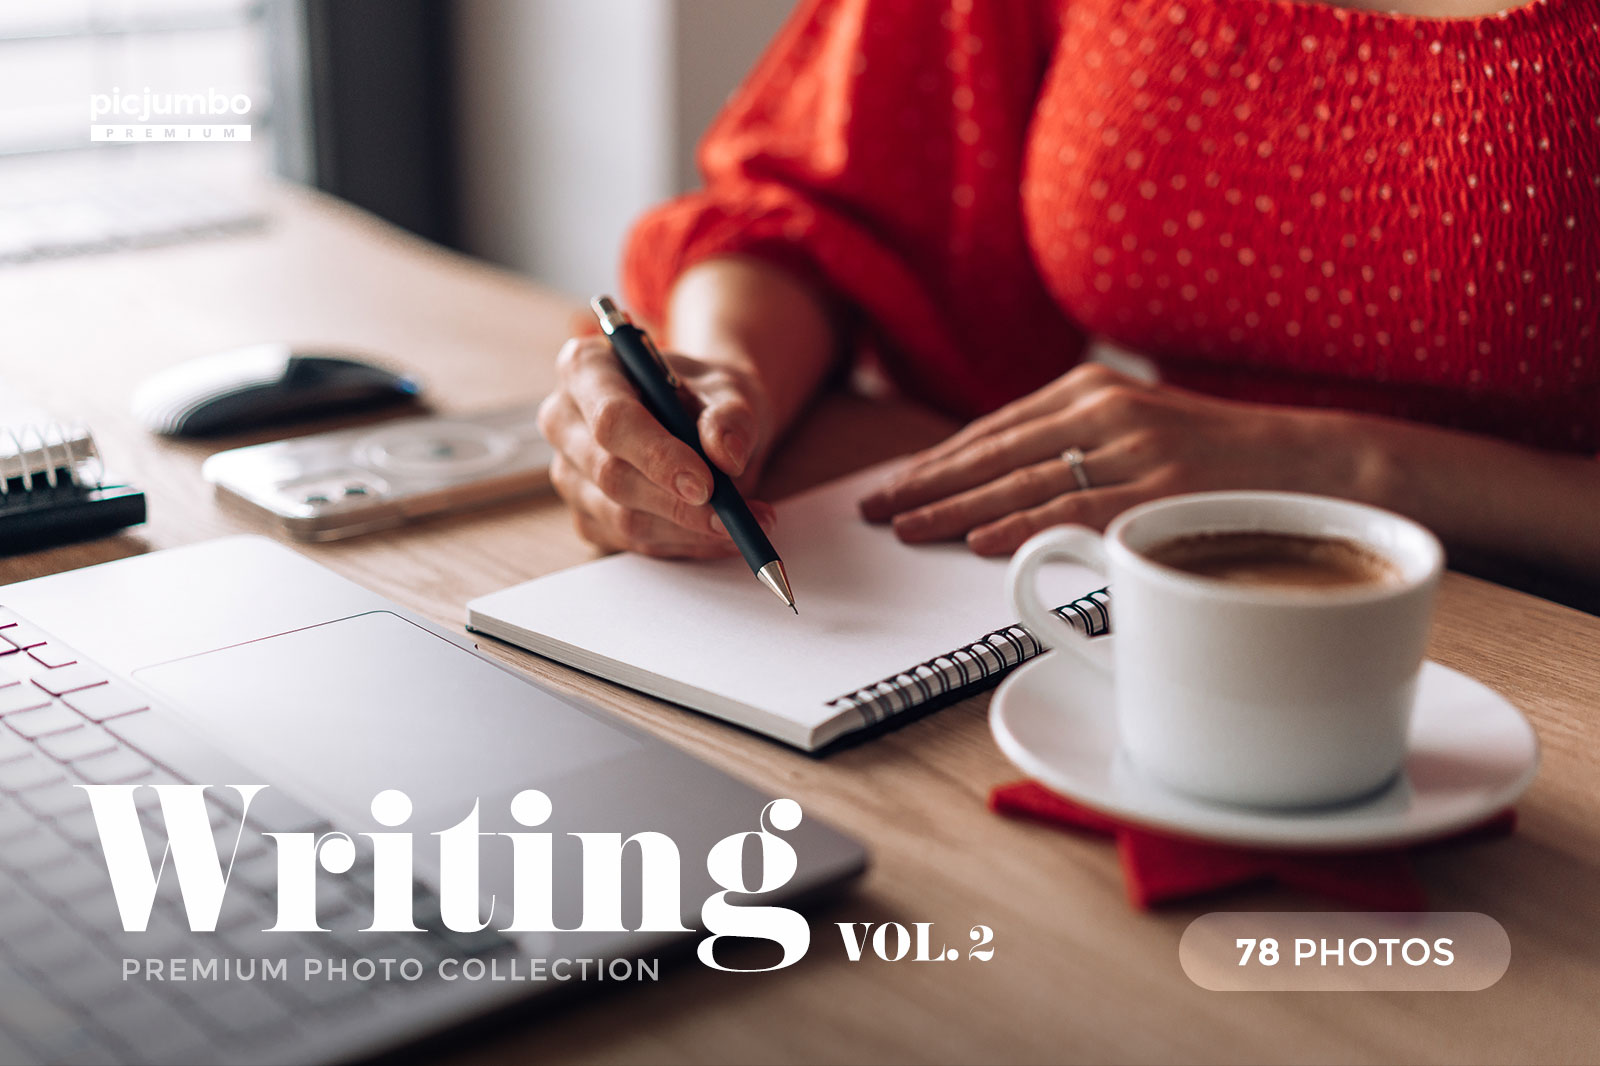 Writing Vol. 2 Stock Photo Collection